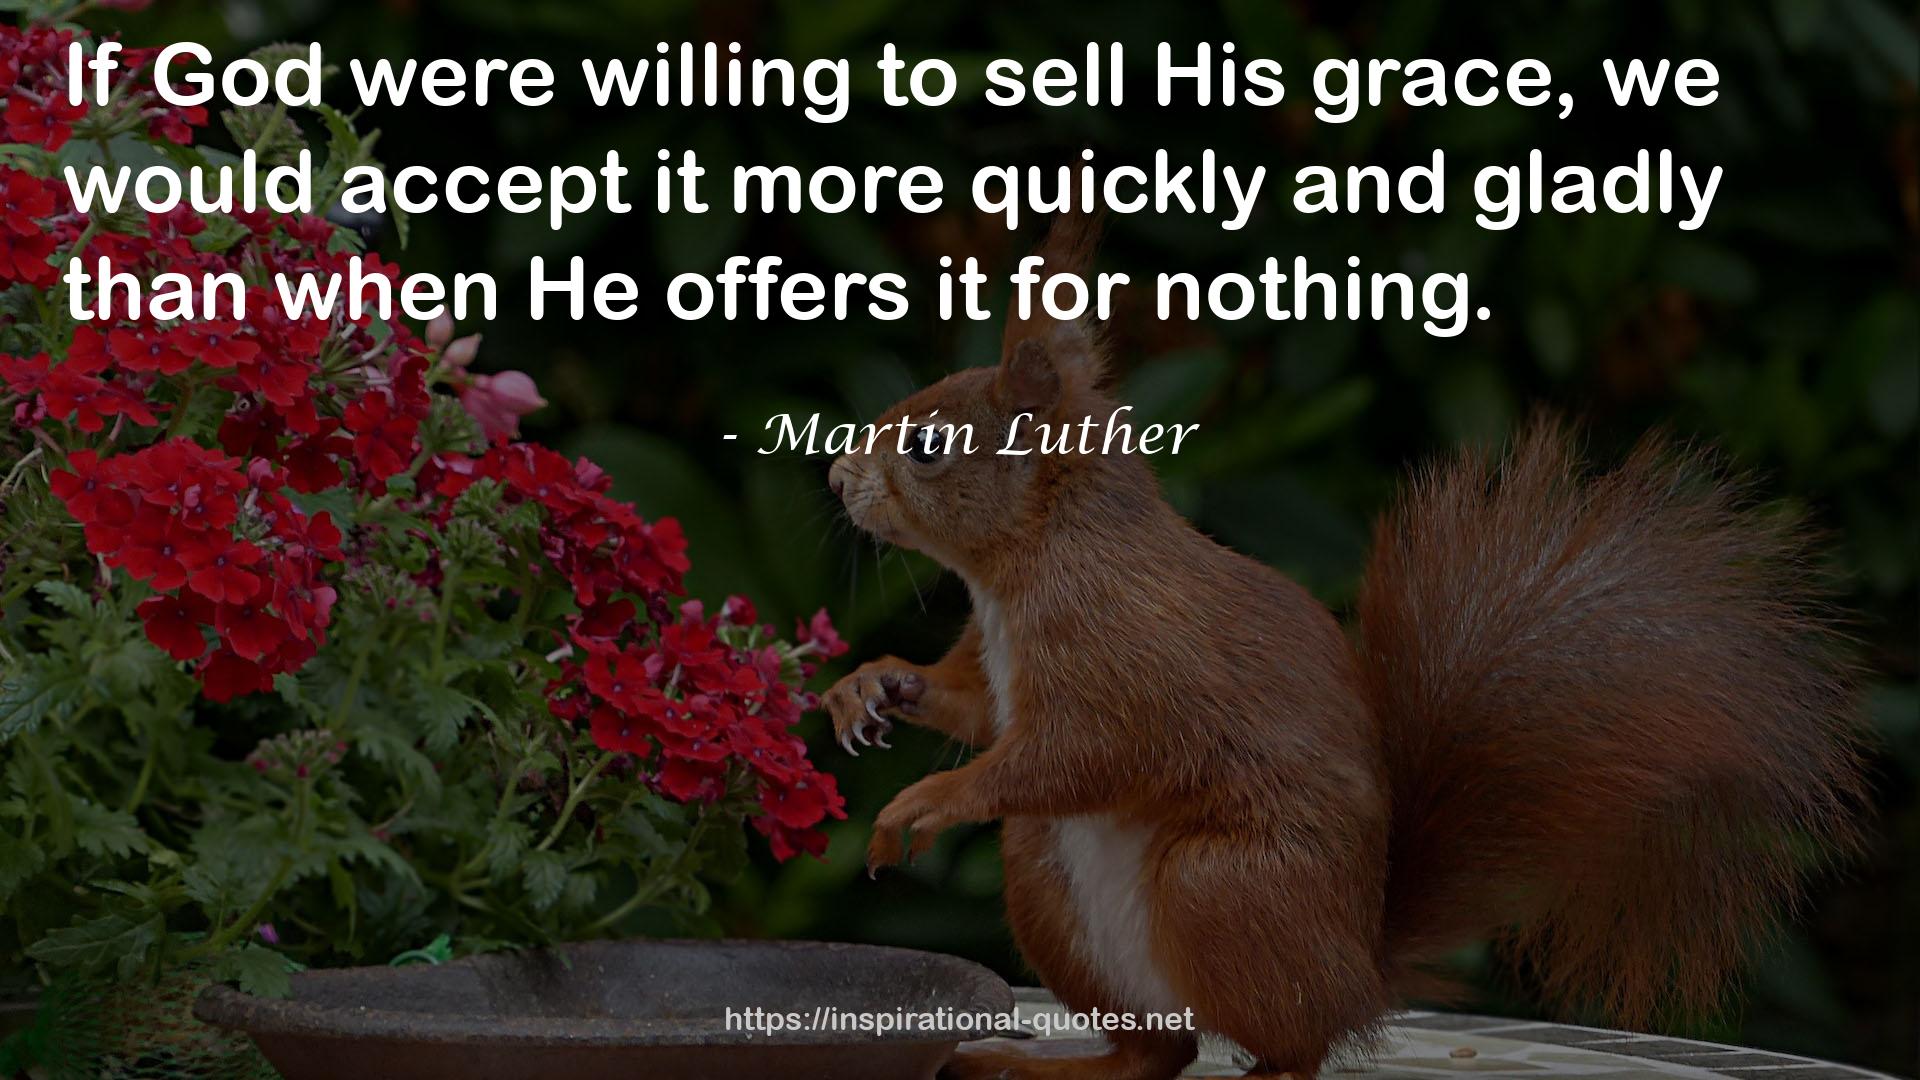 Martin Luther QUOTES